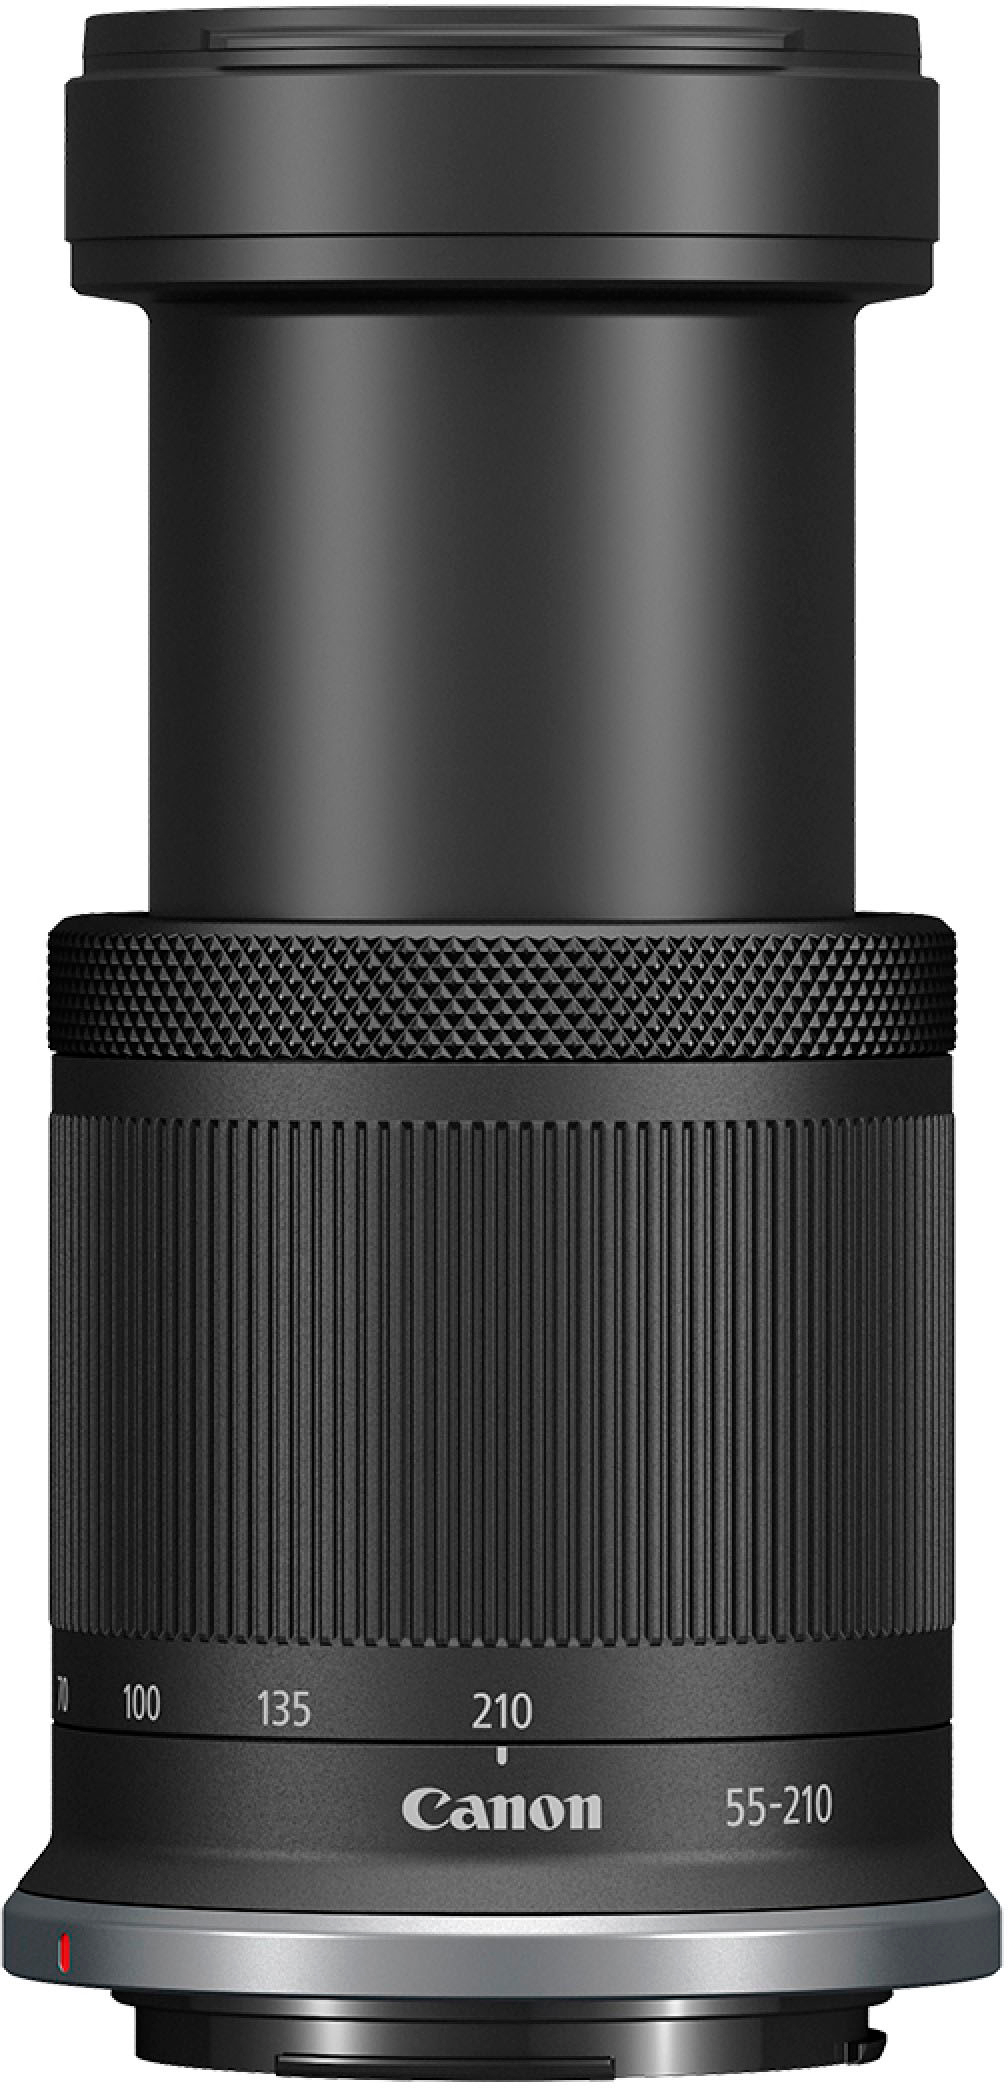 Back View: Canon - EF 500mm f/4L IS II USM Super Telephoto Lens for Most EOS SLR Cameras - White